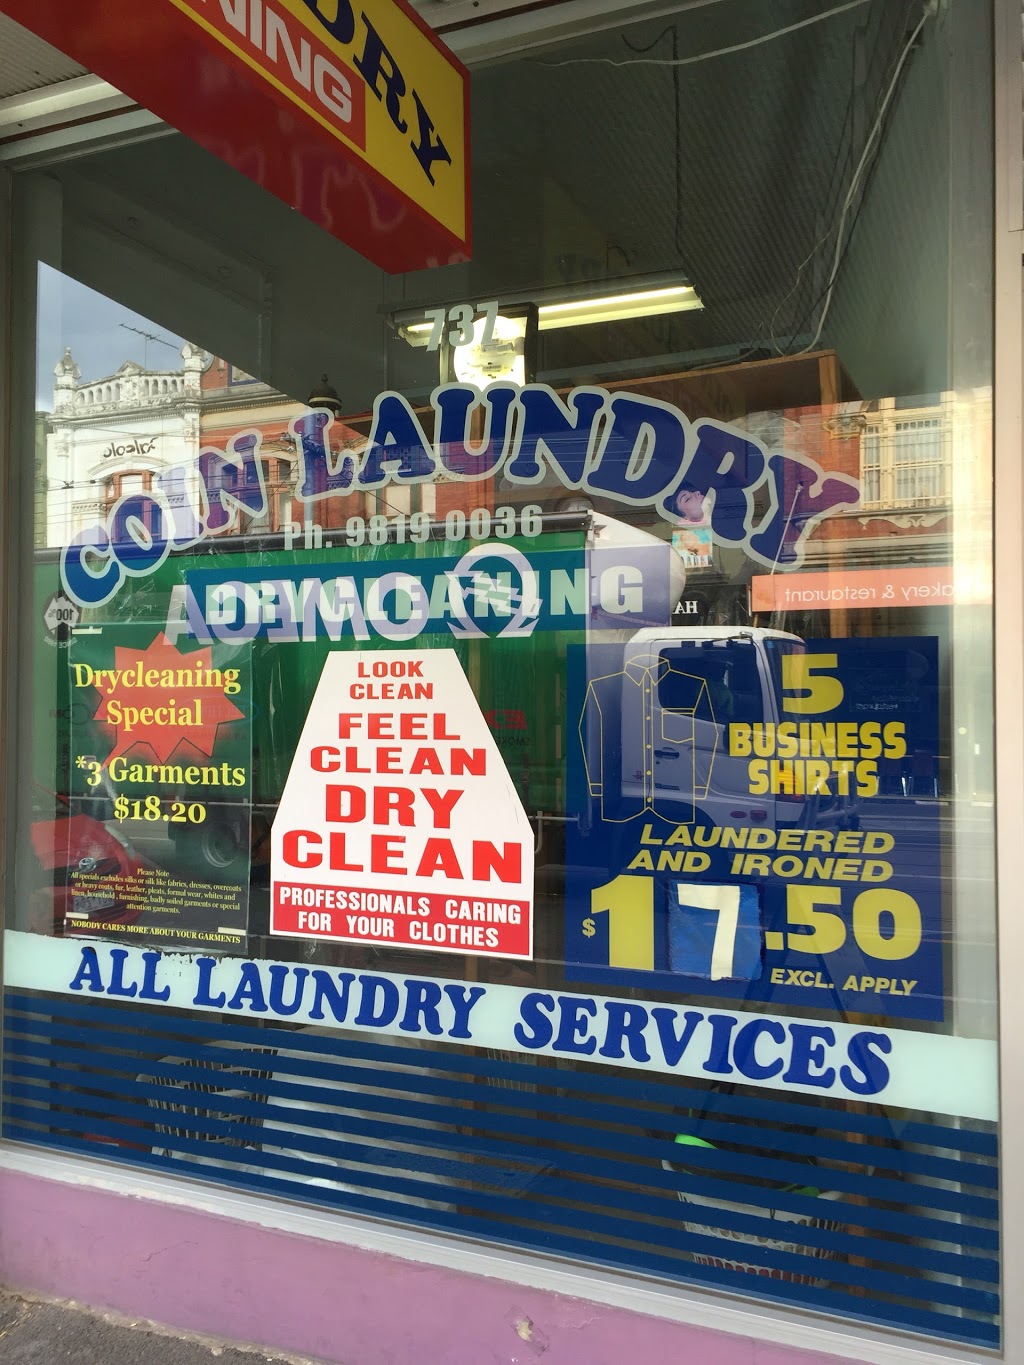 Coin Laundry & Dry Cleaning | laundry | 737 Glenferrie Rd, Hawthorn VIC 3122, Australia | 0451780502 OR +61 451 780 502